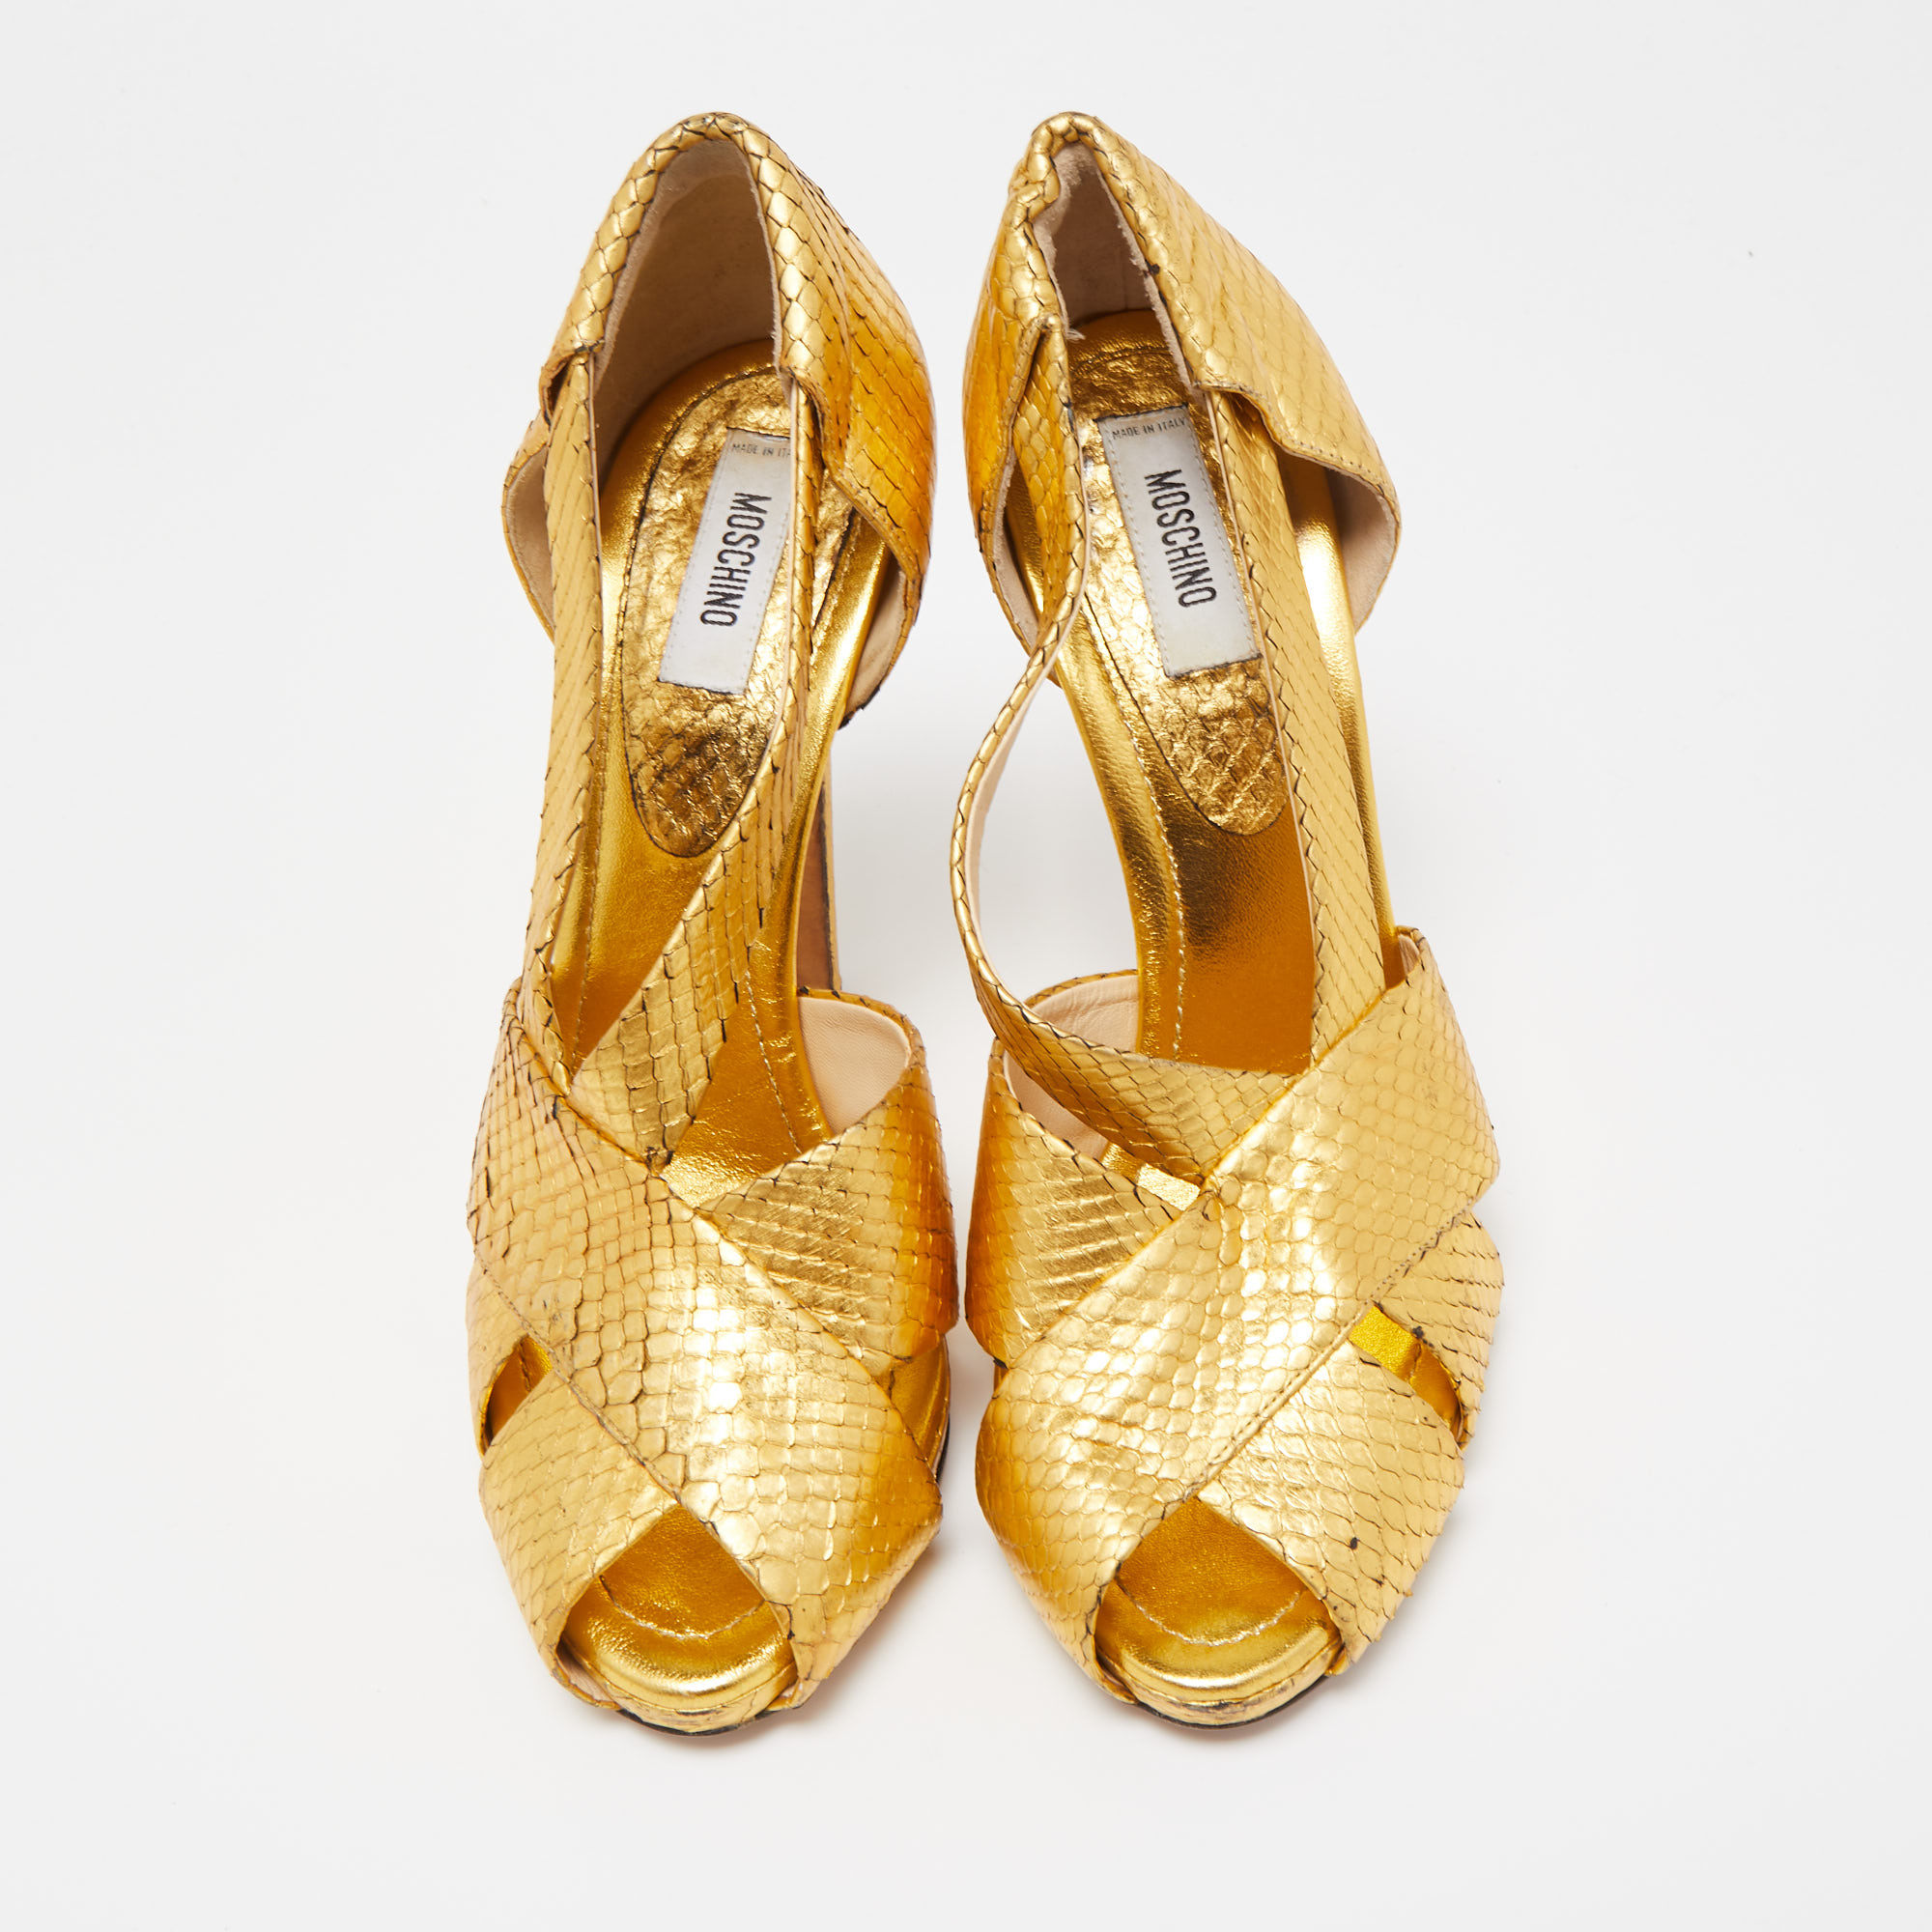 Moschino Gold Python Embossed Leather Peep Toe Pumps Size 40